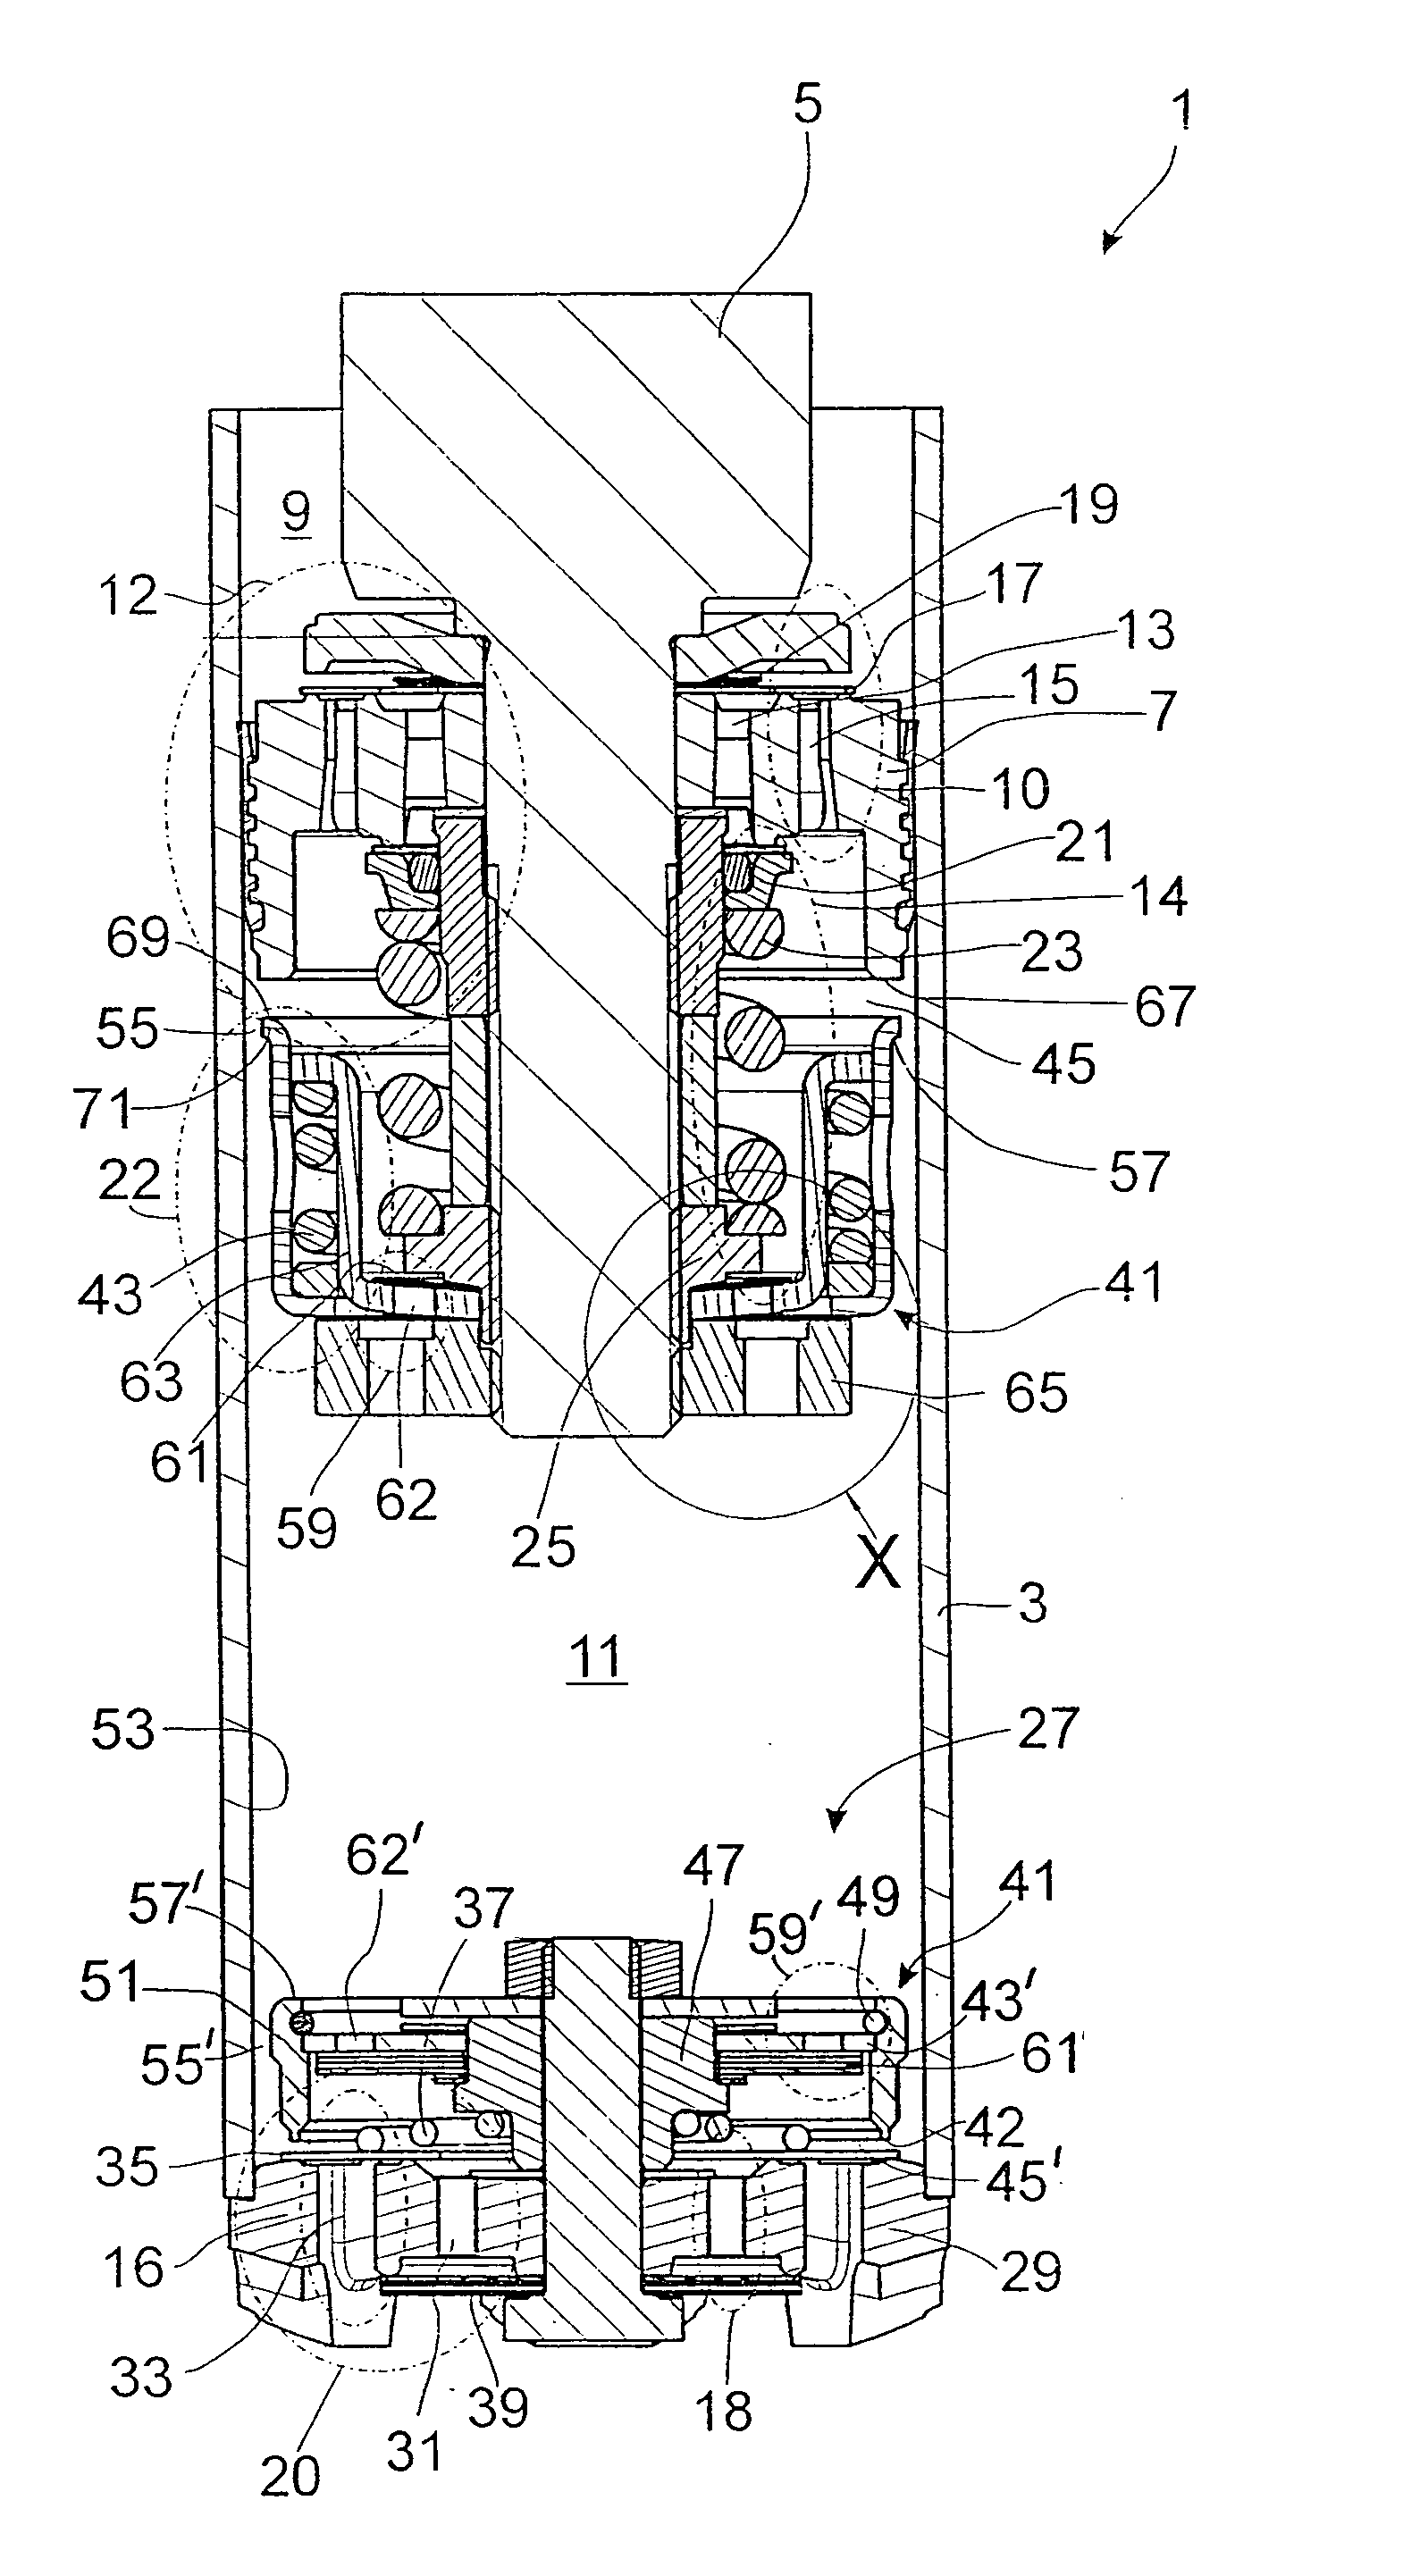 Damping valve assembly with a progressive damping force characteristic